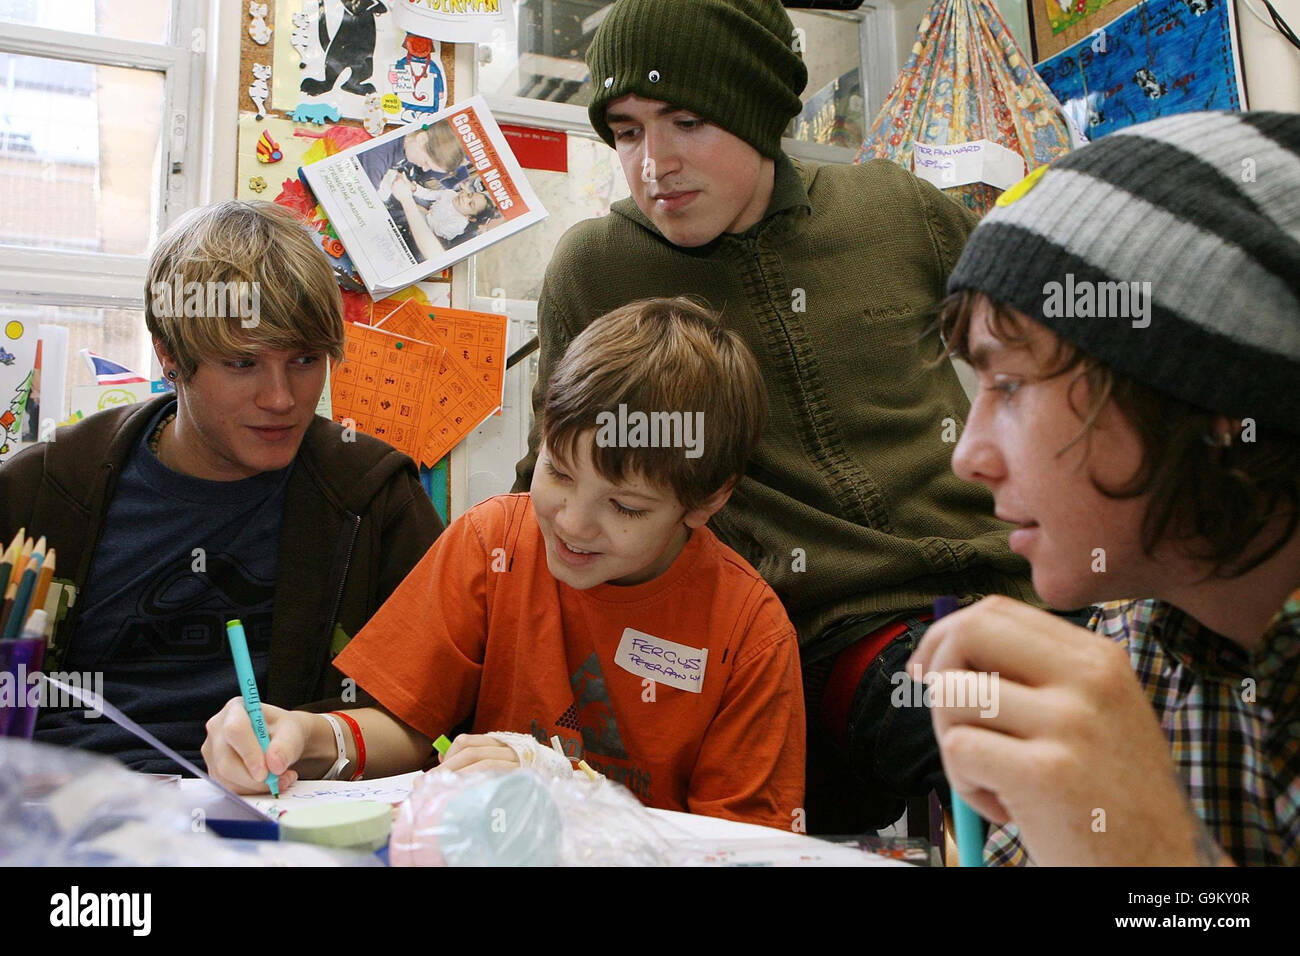 Members of McFly (left to right) Dougie Poynter, Tom Fletcher and Danny Jones help Fergus Hunt, age 11 from Chelmsford in Essex, design a Christmas card at Great Ormond Street Children's Hospital in central London. Stock Photo